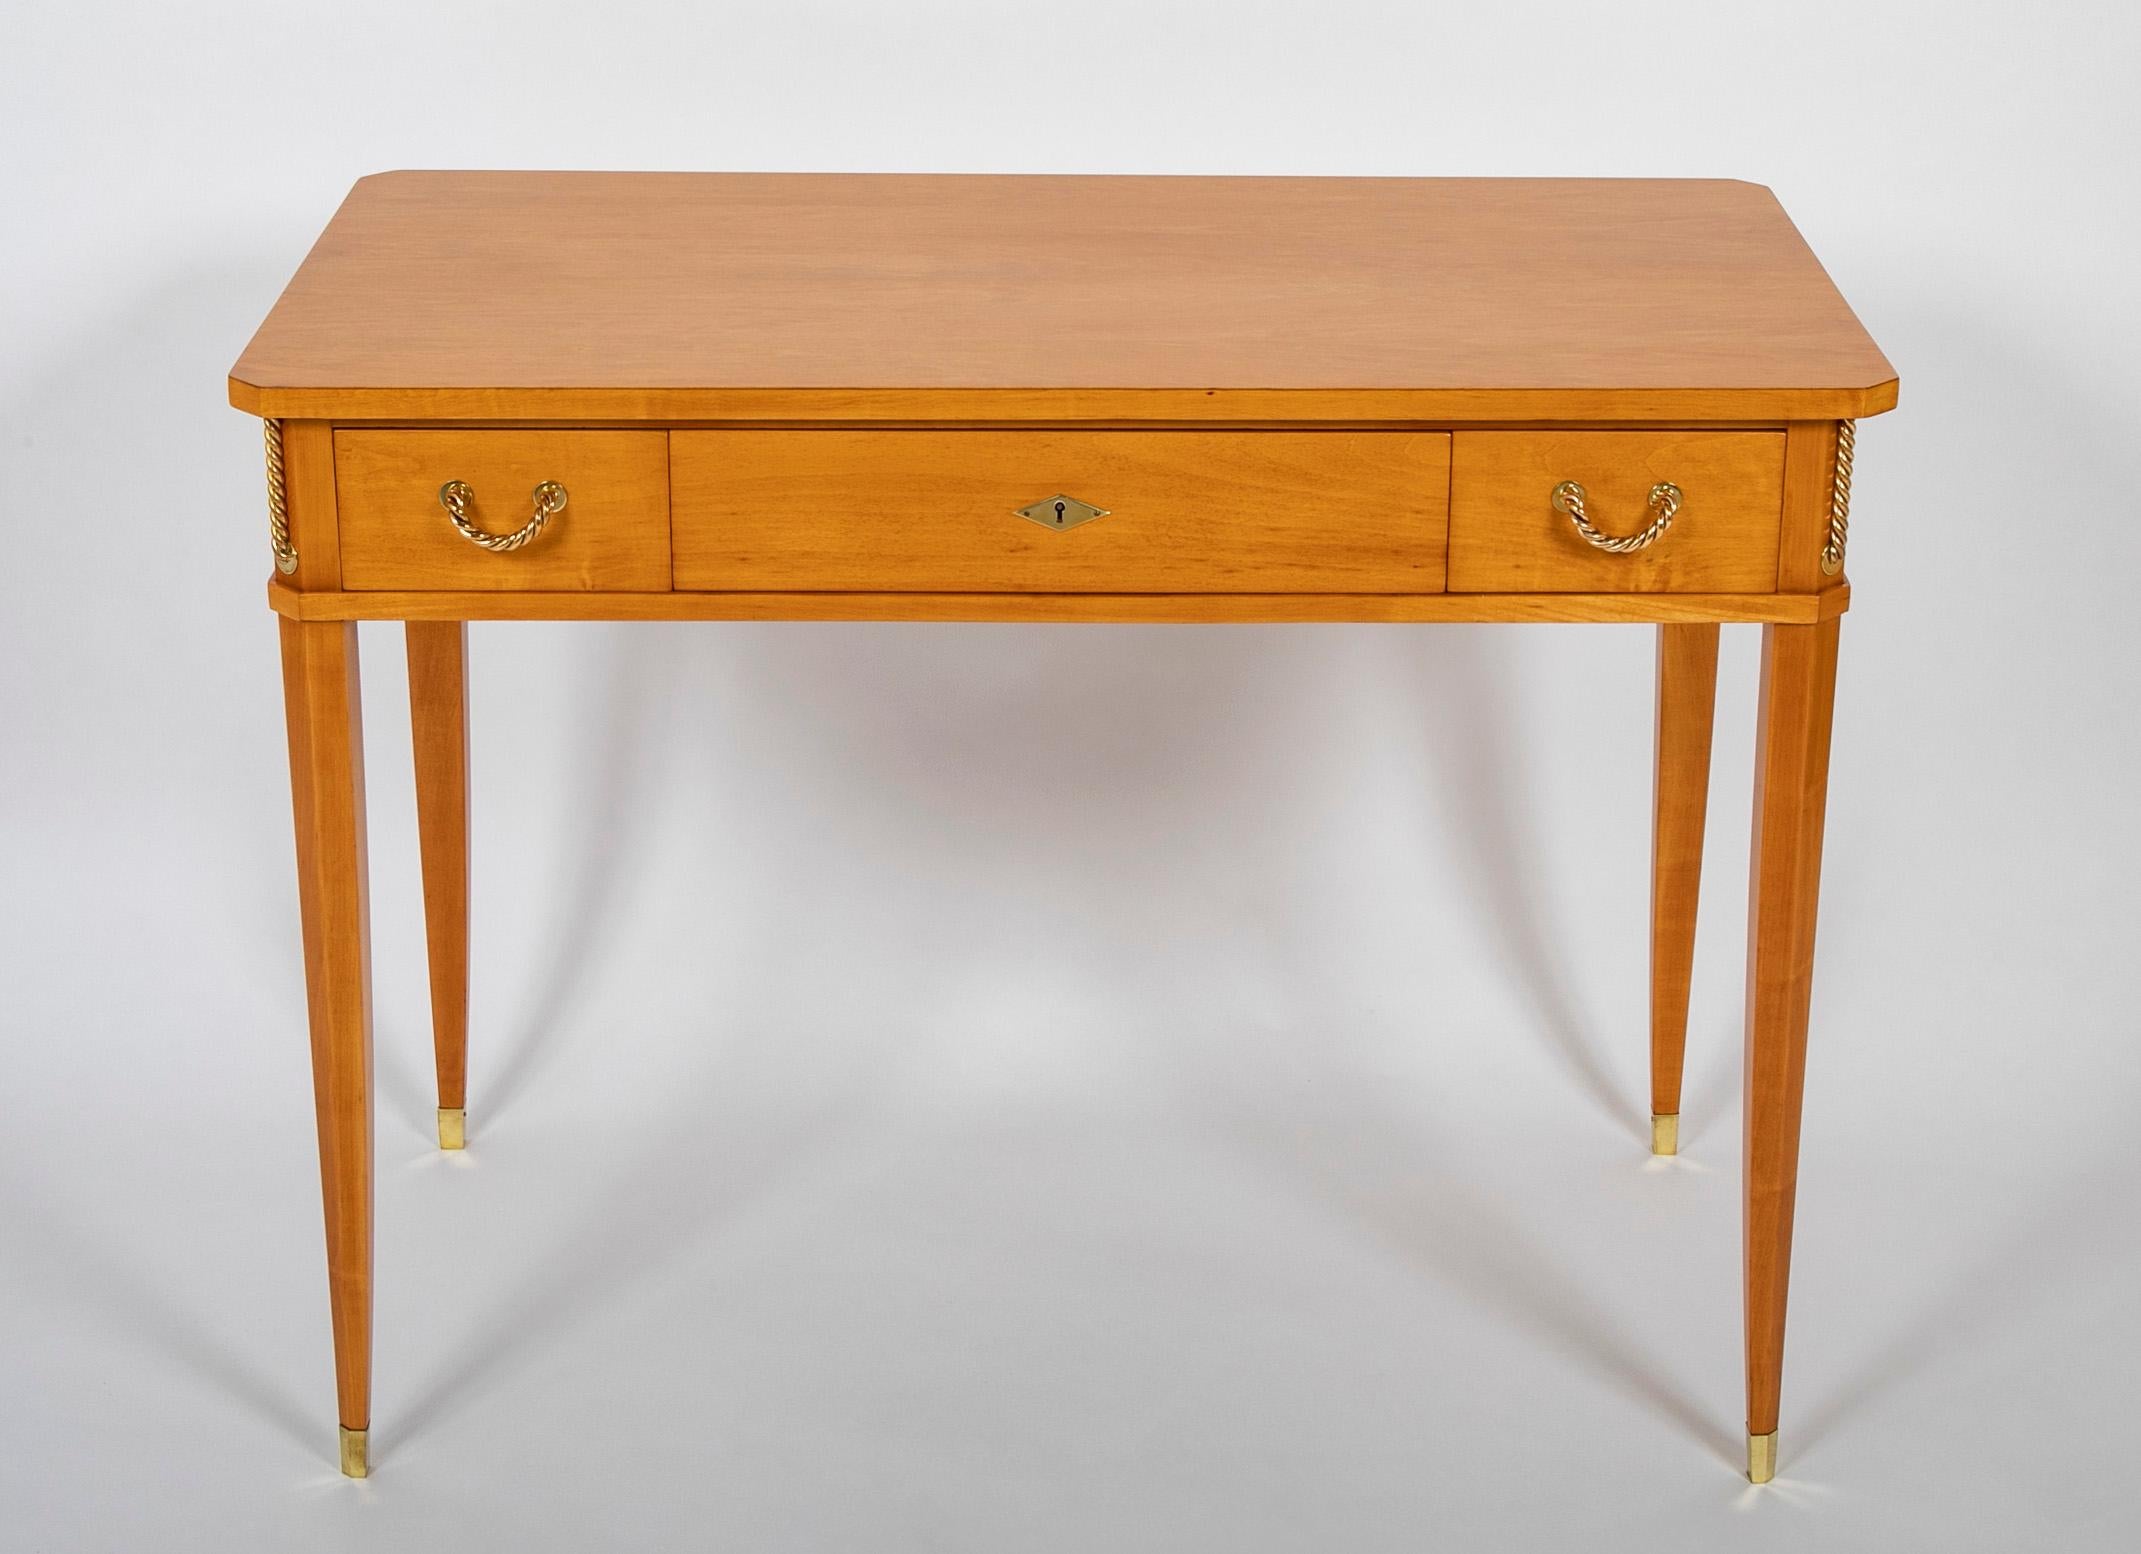 This striking desk is part of a large group of Sycamore furniture designed by Raphael and feature in the 1939 Salon Des Arts Mengers. This show was seen as solidifying Raphaels place with the contemporary luxury interior design market. The follow